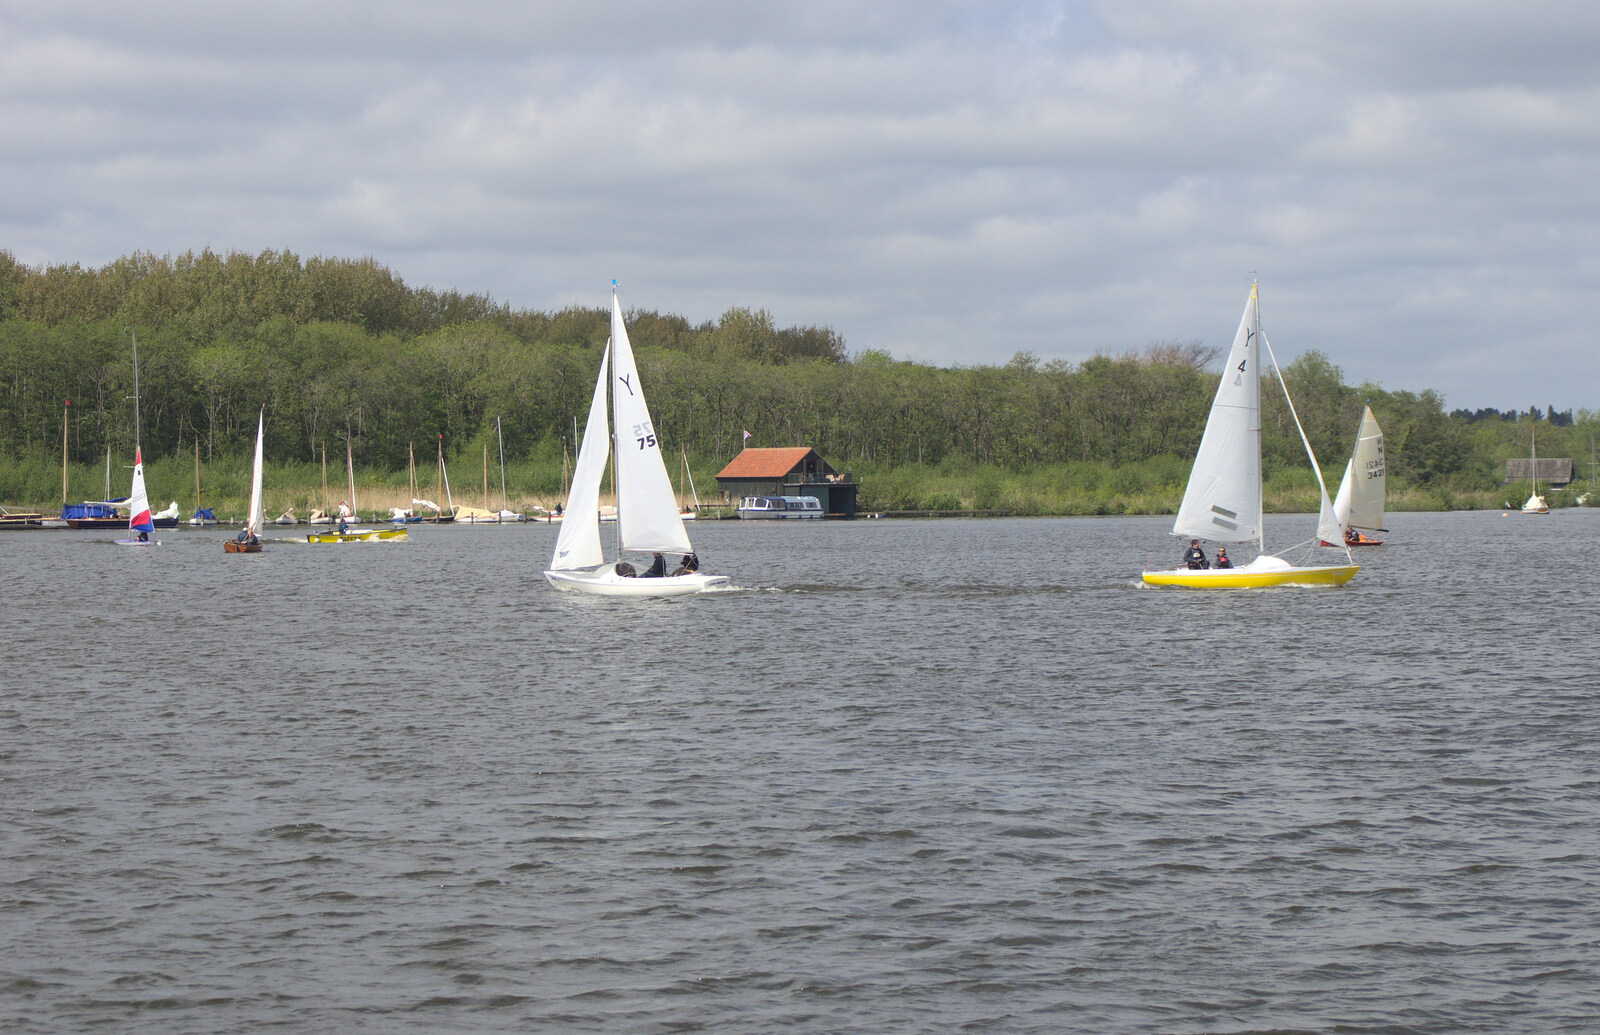 Dinghies scud about on Wroxham Broad from A Trip on the Norfolk Broads, Wroxham, Norfolk - 25th May 2013